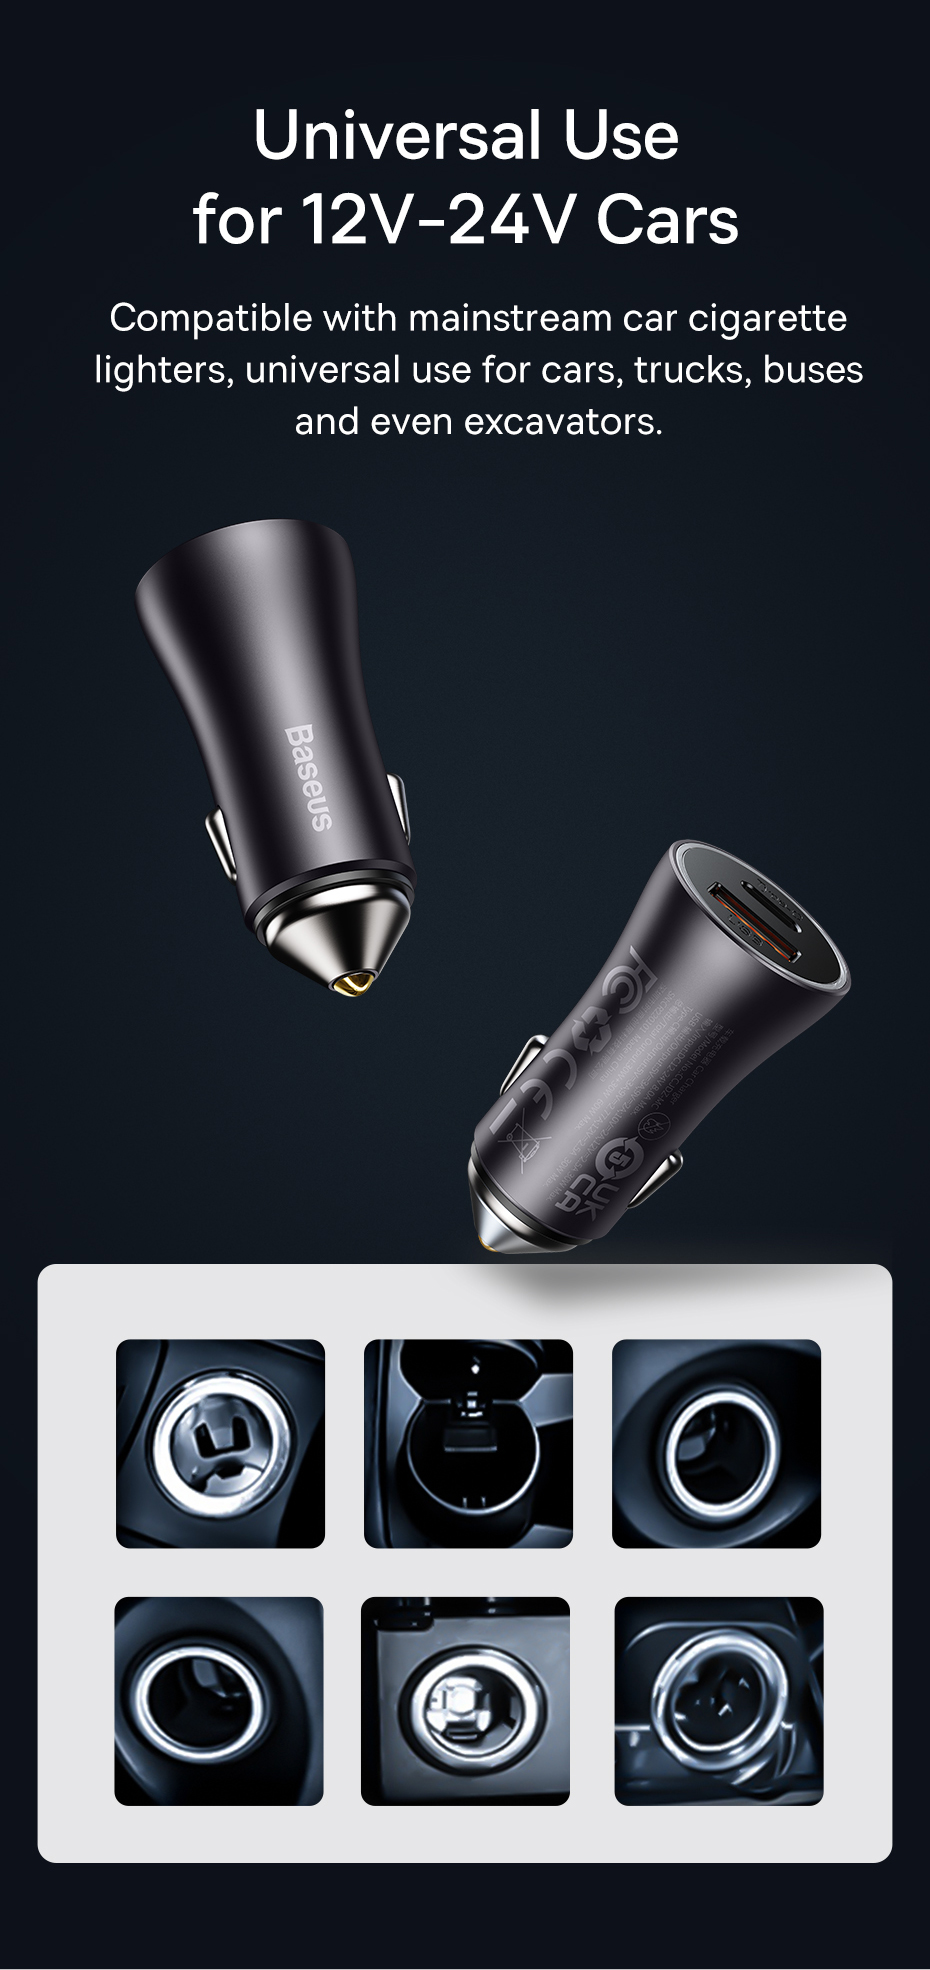 Baseus-60W-2-Port-USB-C-PD-Car-Charger-Dual-30W-QC30-PD30-Support-AFC-FCP-SCP-Fast-Charging-Metal-Ad-1938544-12